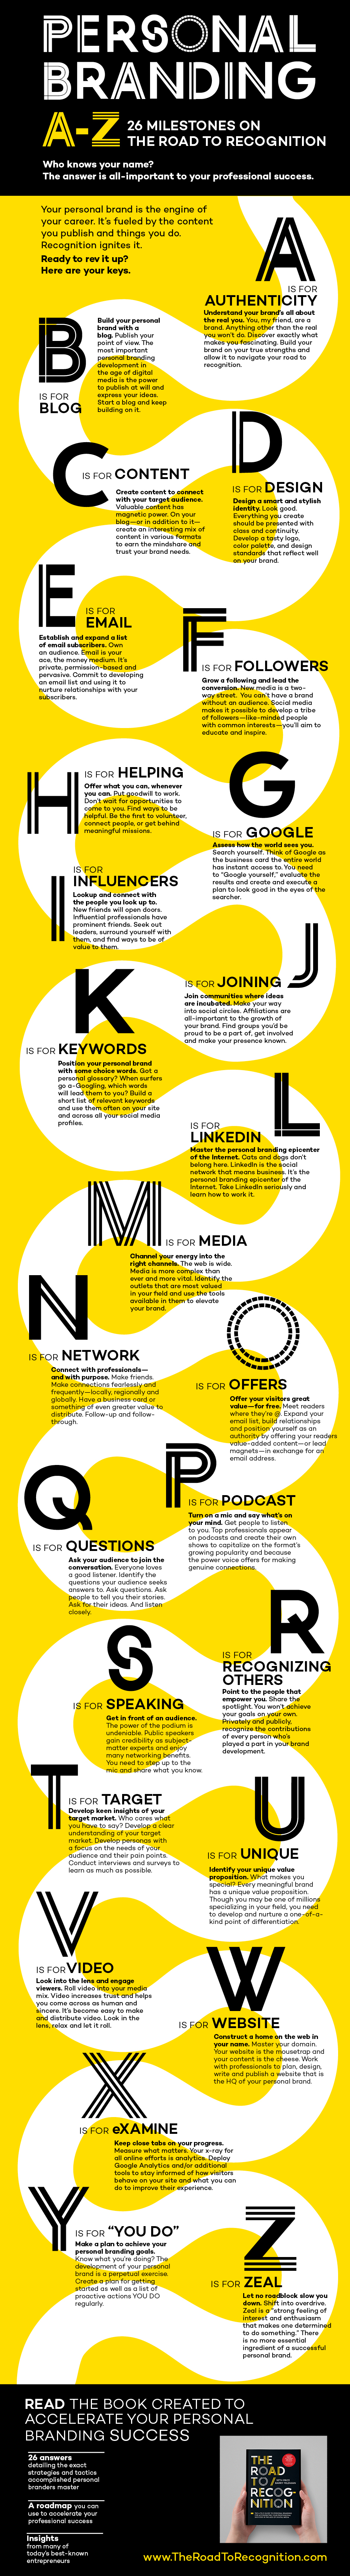 personal-branding-a-to-z-guide-infographic-y